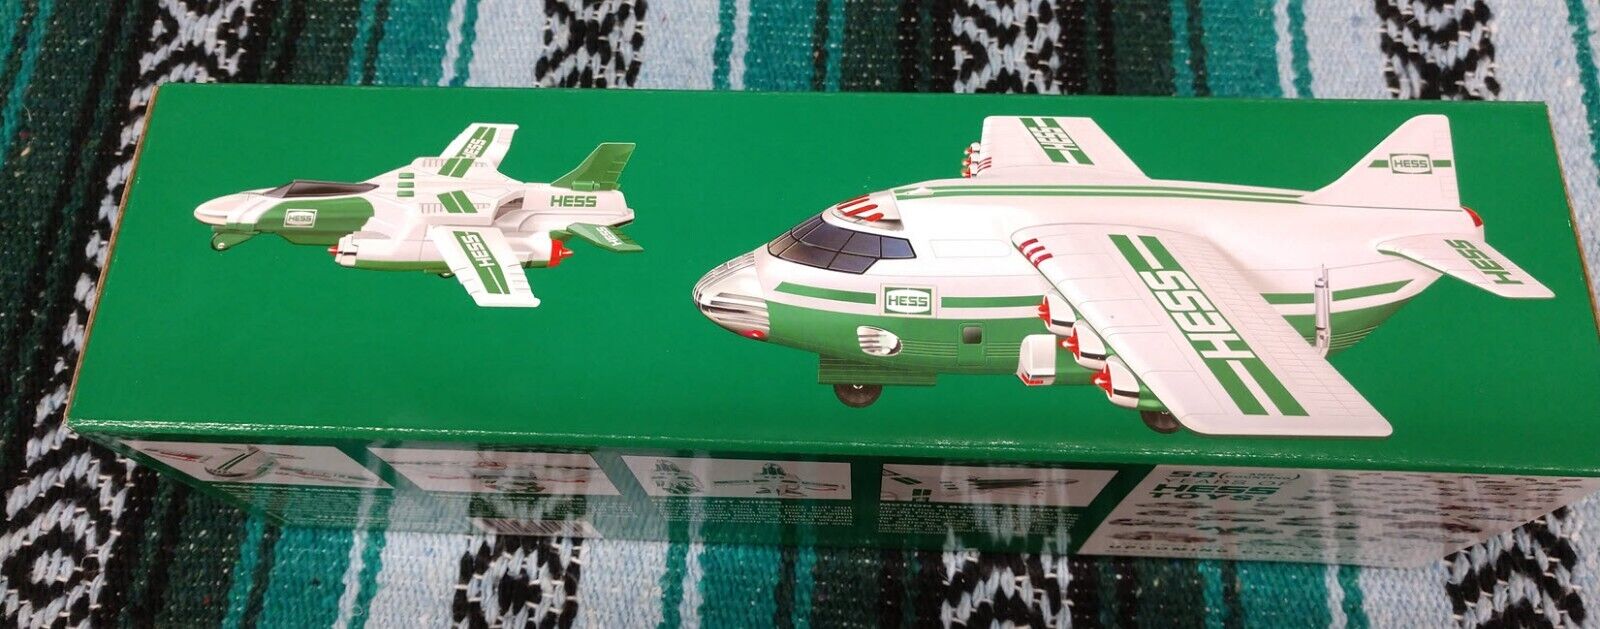 2021 Hess Toy Truck Cargo Plane And Jet Lights Original Collectible